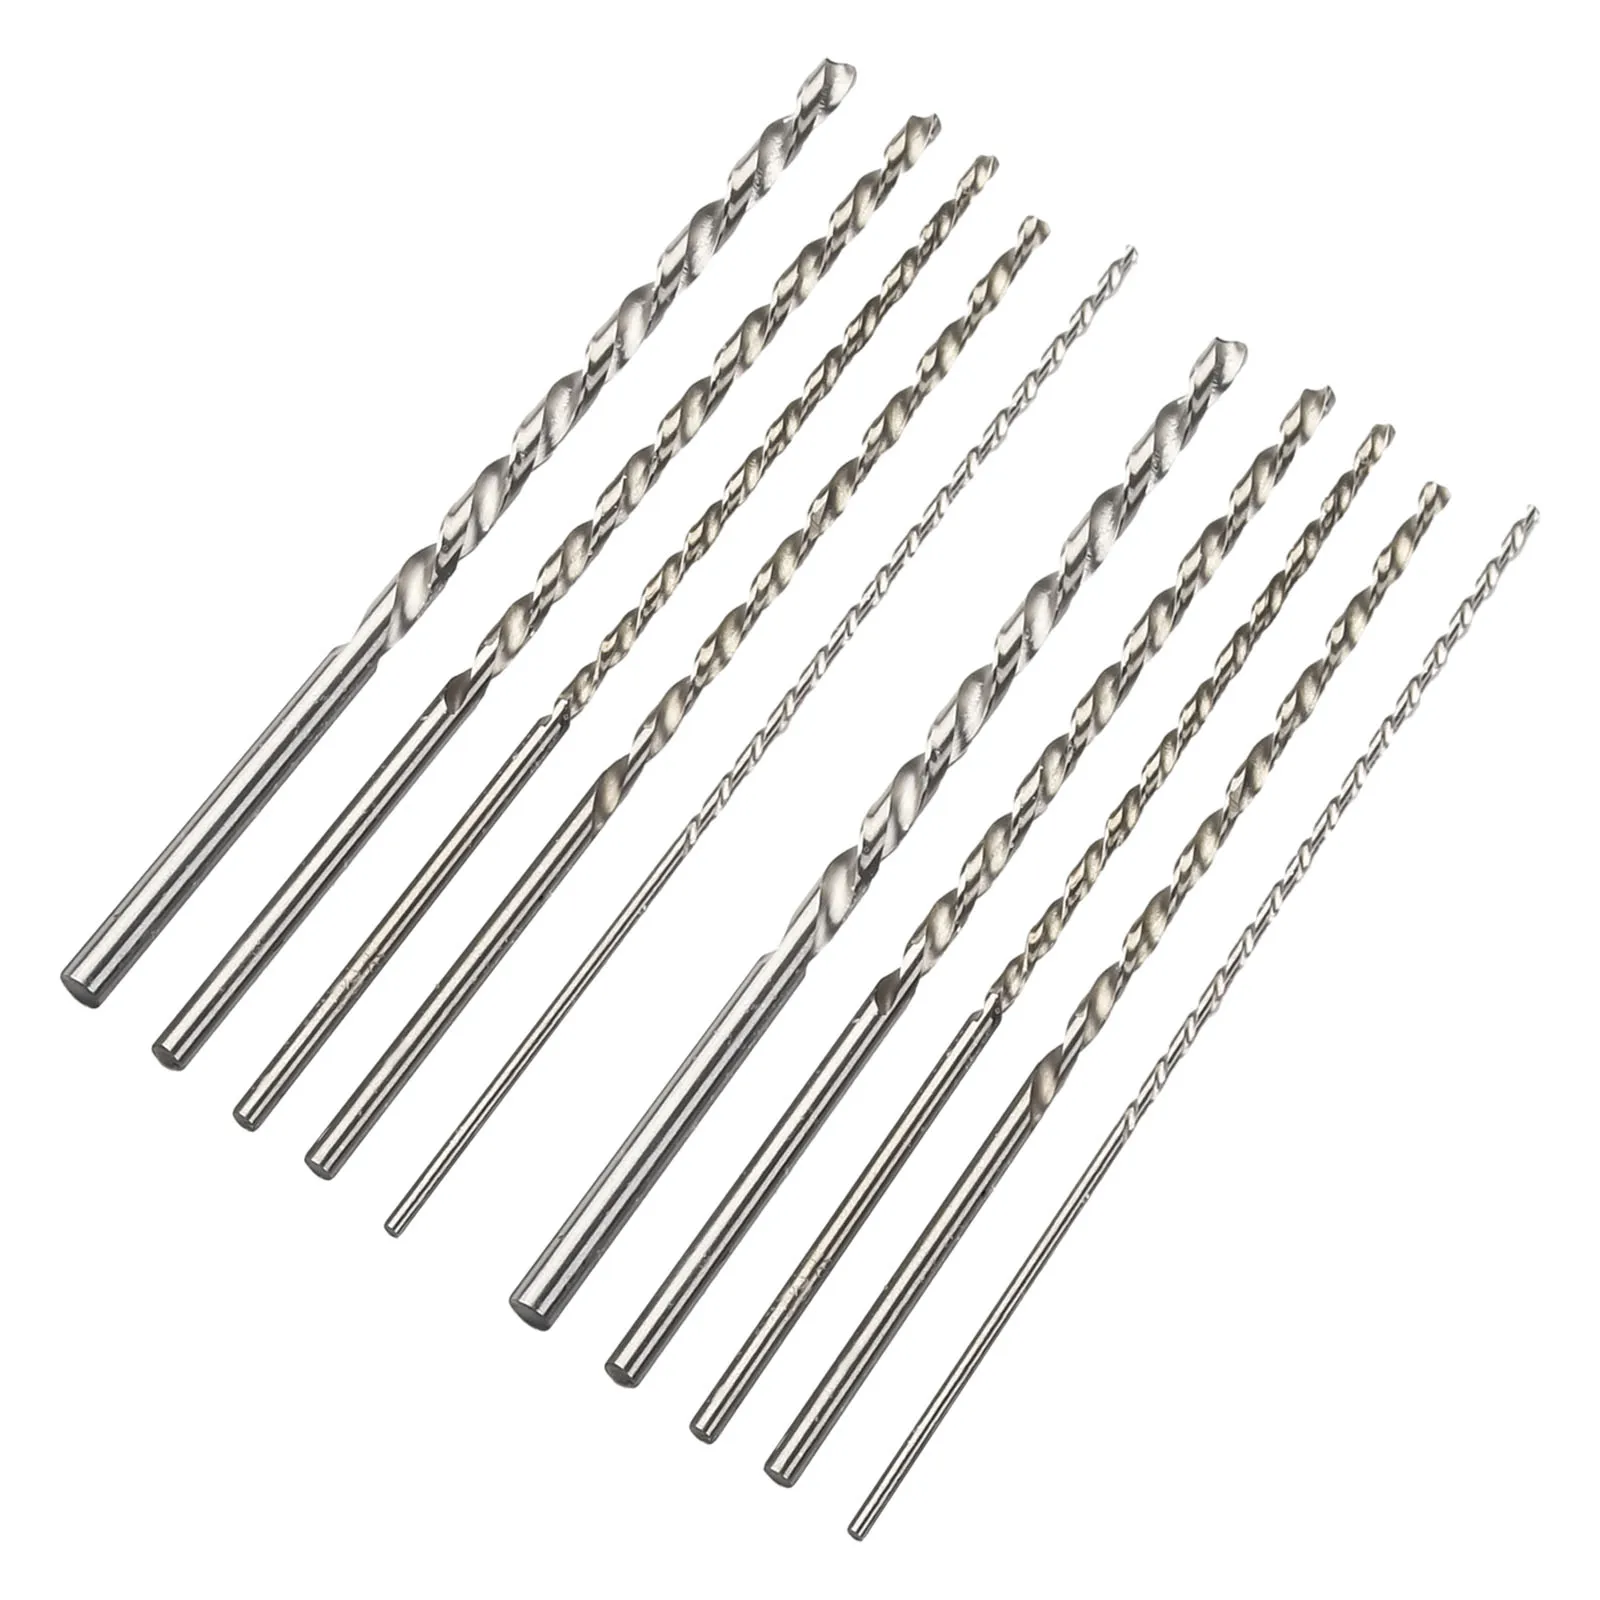 High Speed Steel Bit Set Extra Long HSS Straight Drill Bits Power Tools  For Metal Wood Glass 10Pcs 2mm 3mm 3.5mm 4mm 5mm 10pcs new njm5532d jrc5532d 5532d low noise dual operational amplifier straight into dip 8 integrated circuit